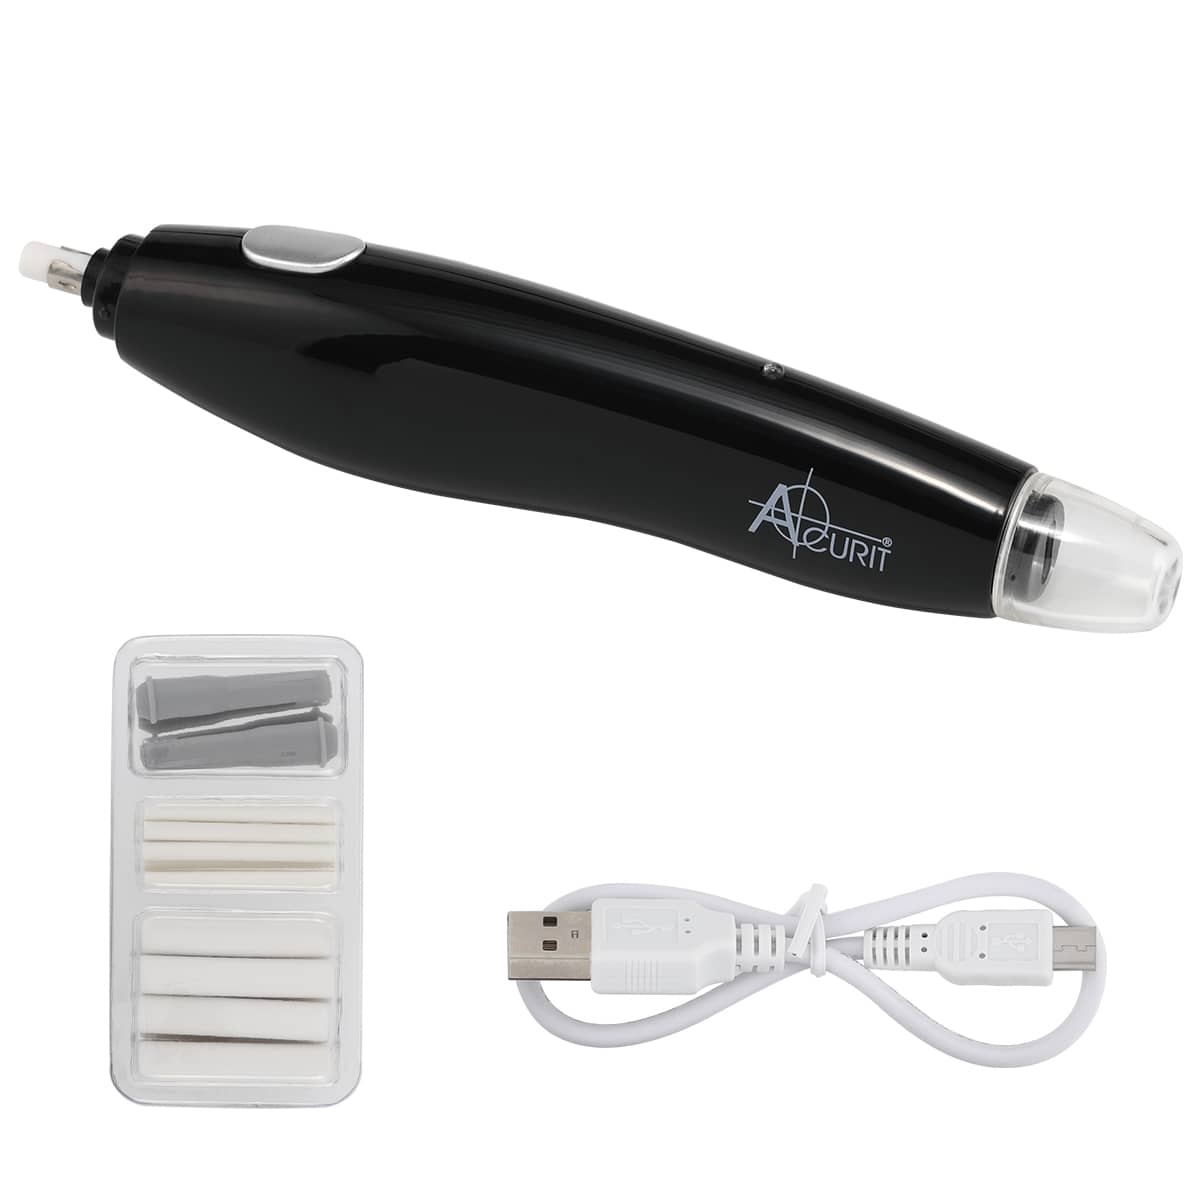 Acurit Eraser Rechargeable Electric Battery-Operated